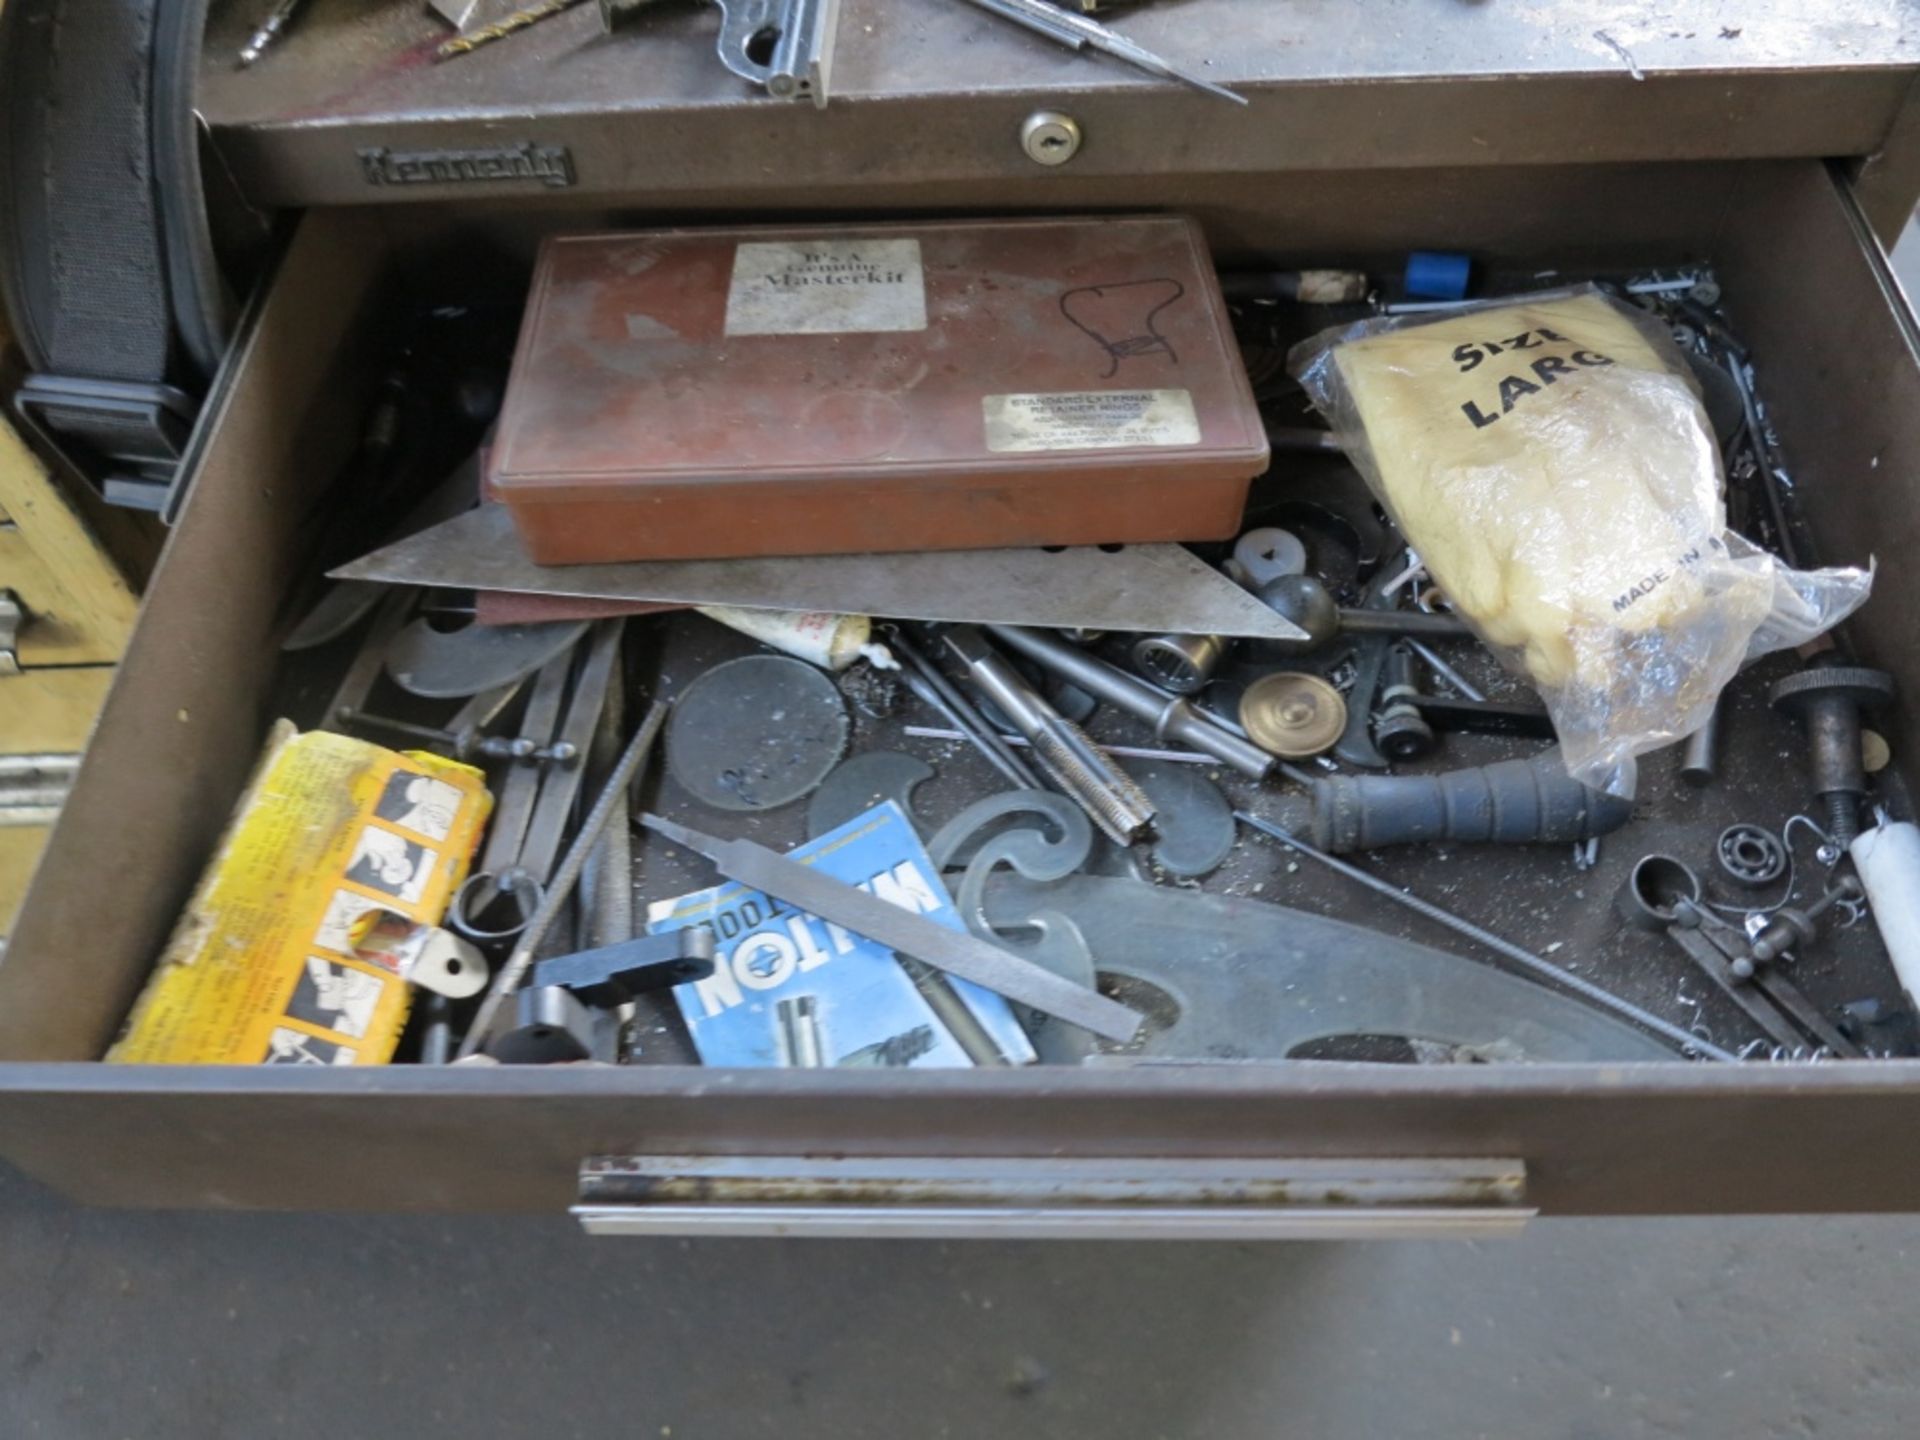 KENNEDY TOOL BOX W/ CONTENTS - Image 2 of 5